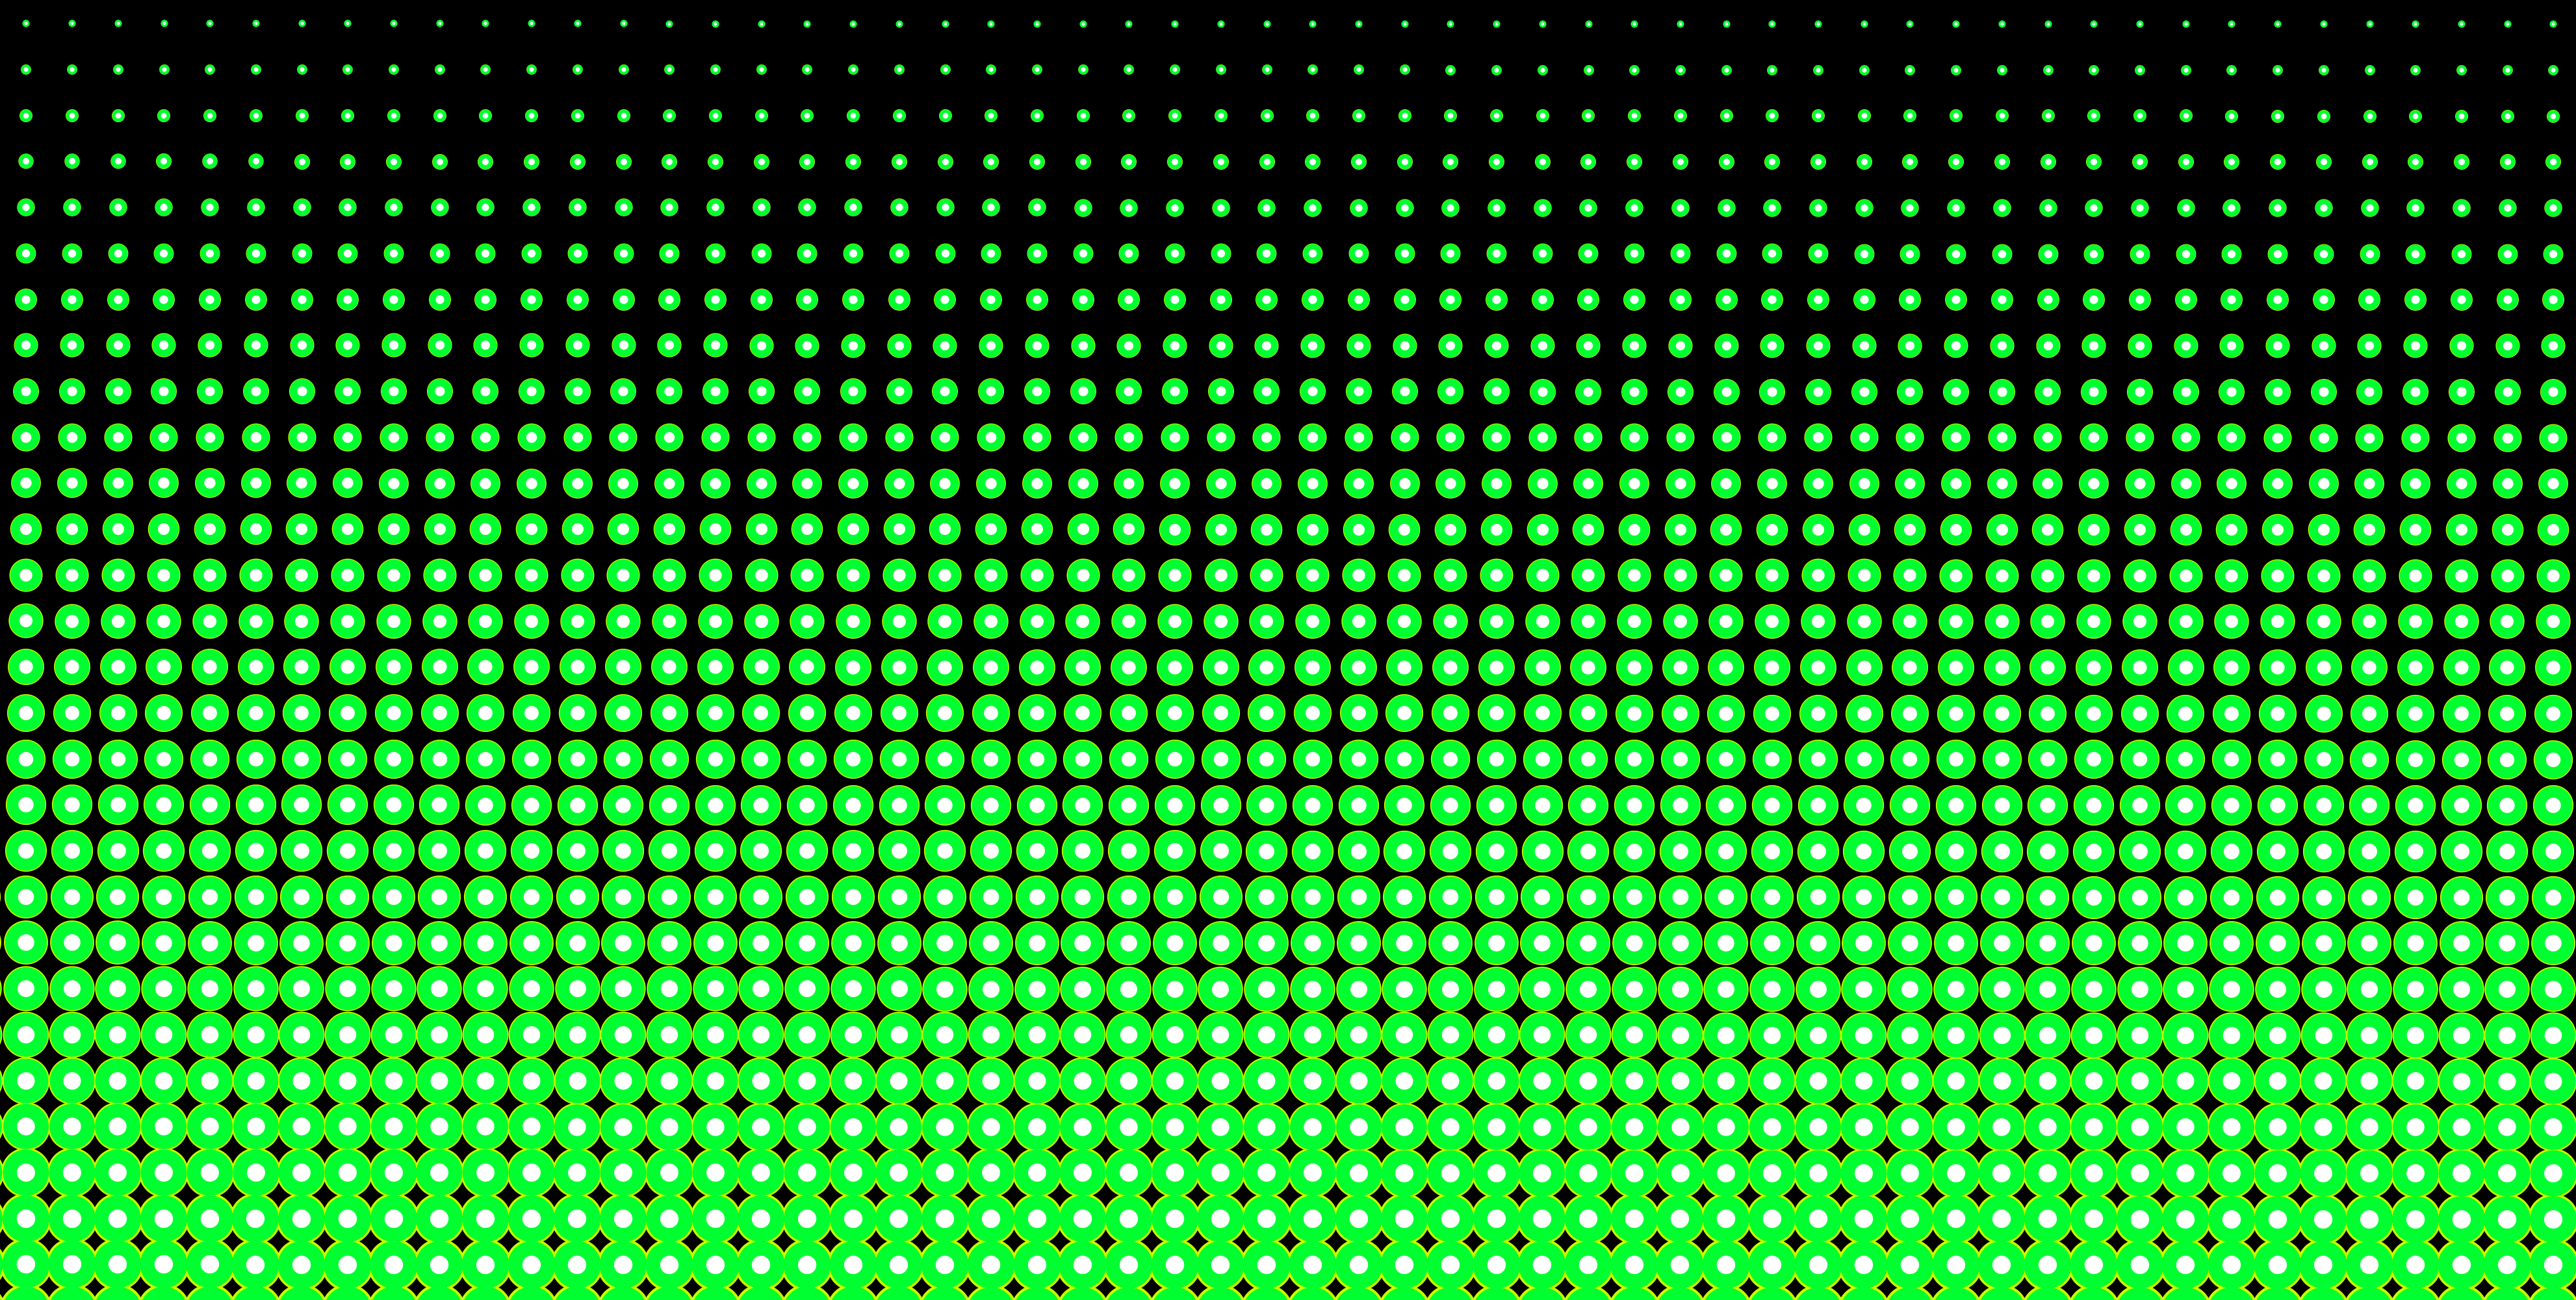 Black And Green Backgrounds